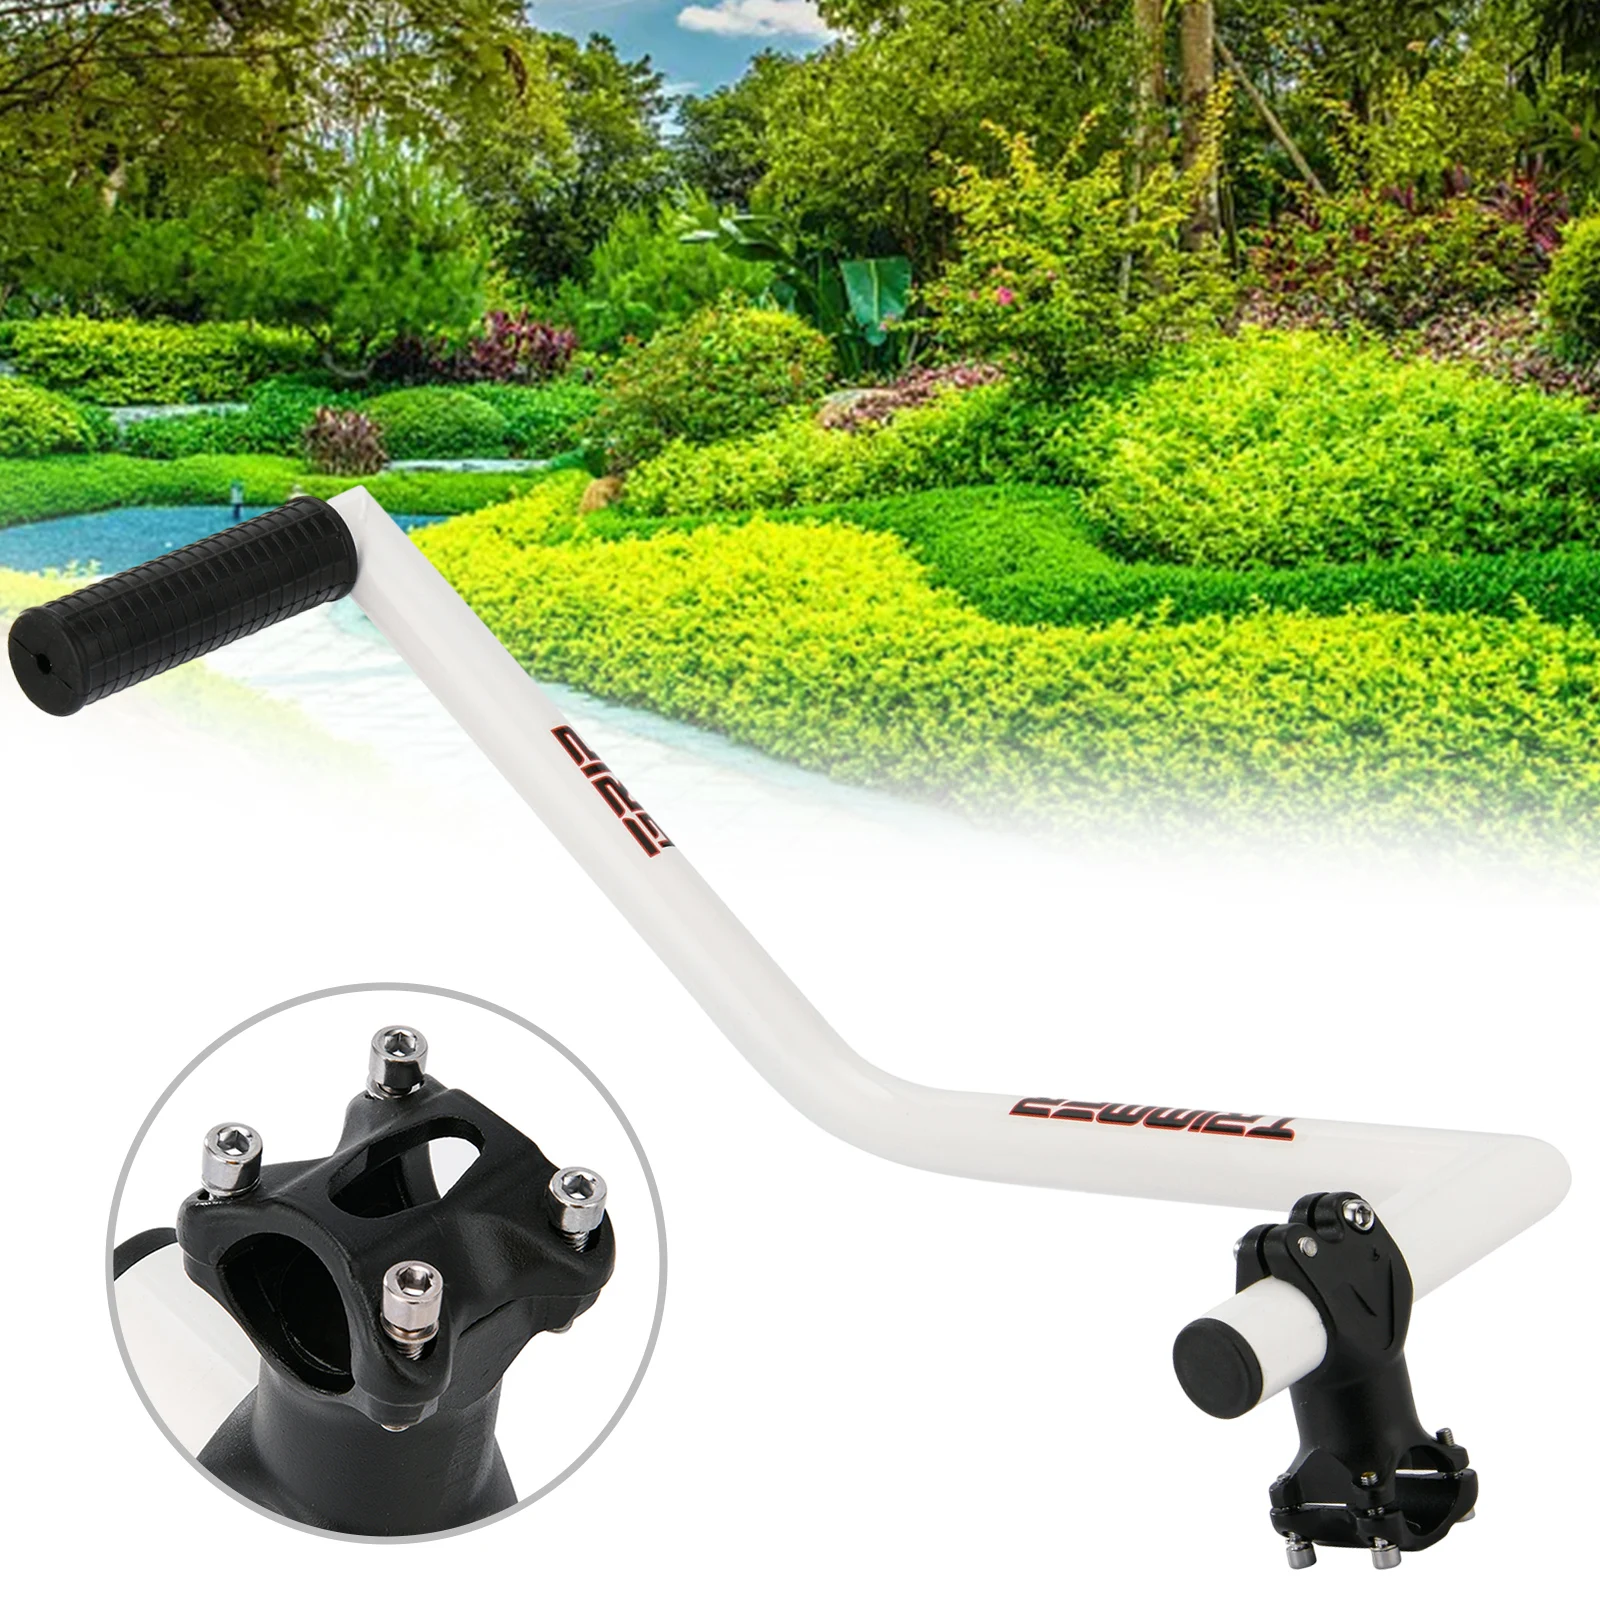 

Ergonomic Trimmer Handle For Efficient Lawn Care And Landscaping Home DIY Accessories Garden Power Tool Spare Parts